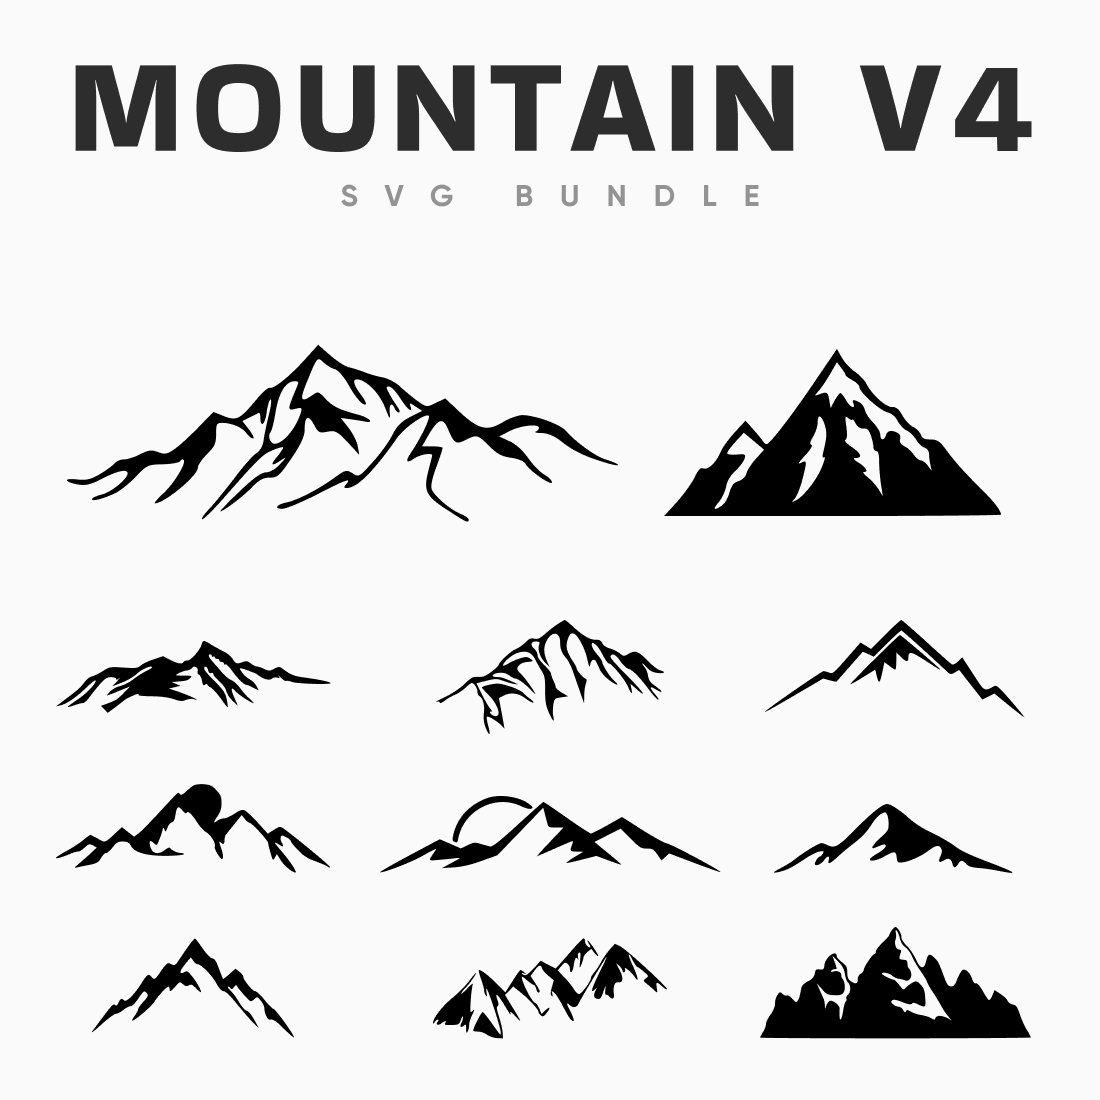 Interesting mountains for your logo or image.